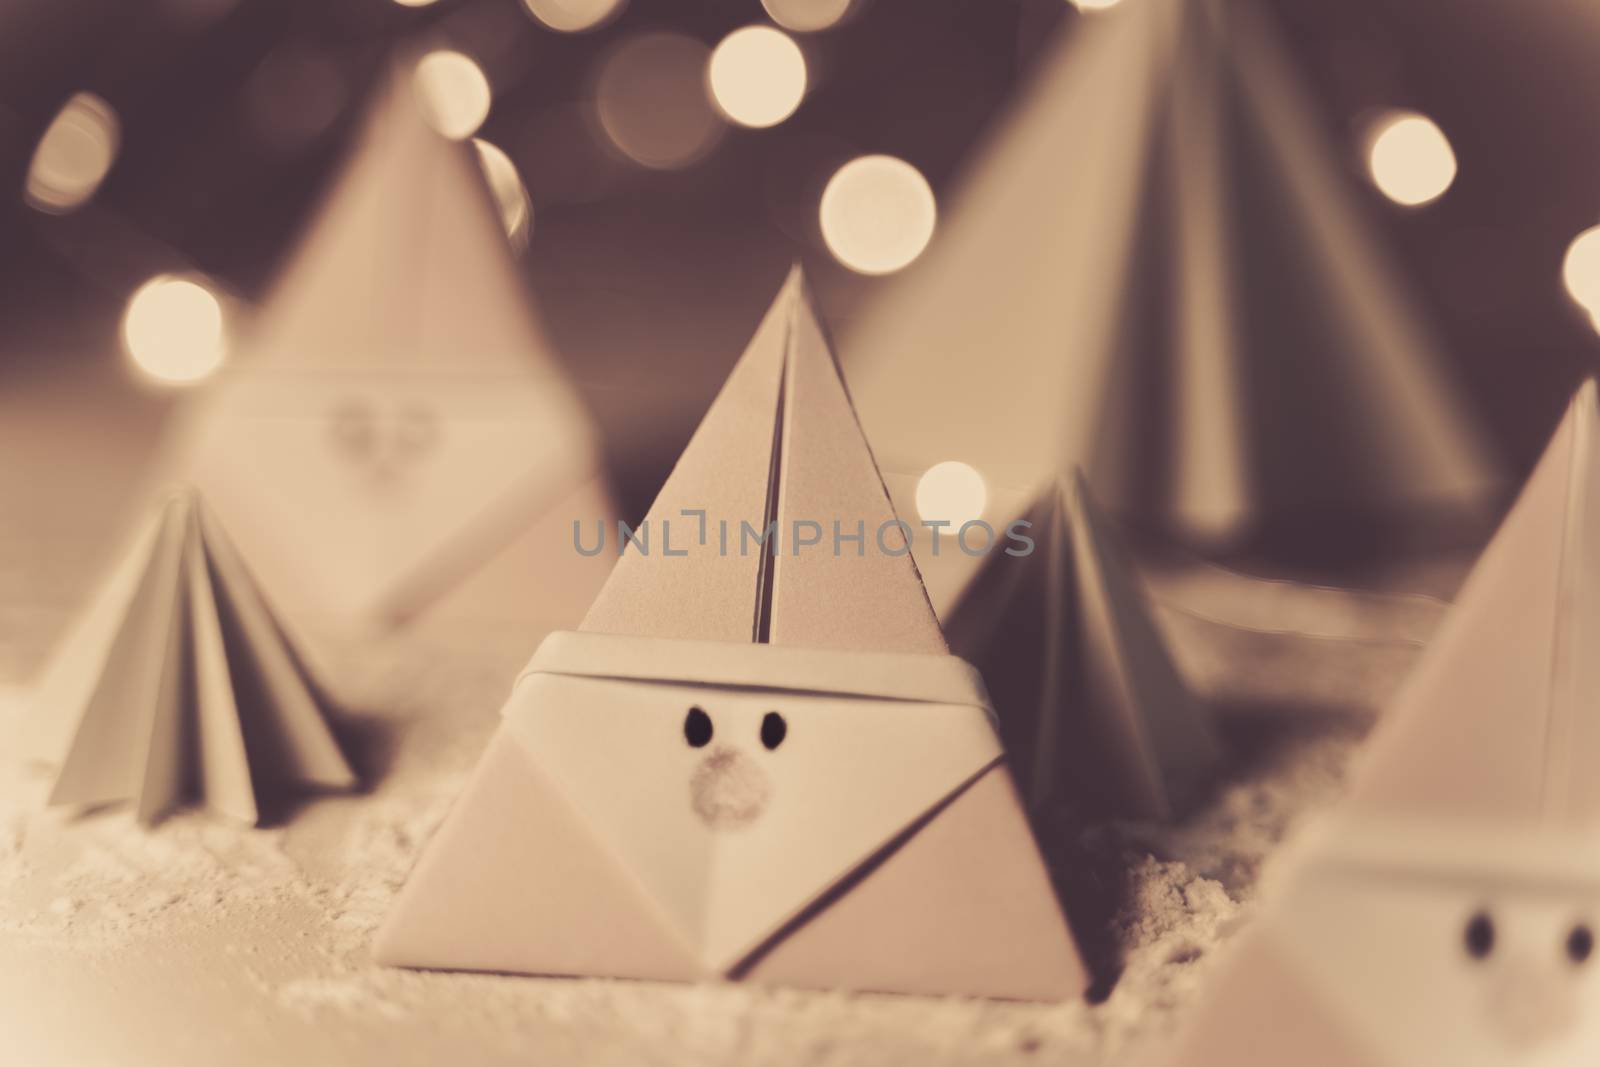 Origami Xmas scene with Santa claus and crhistmas trees in paper craft, sepia tone